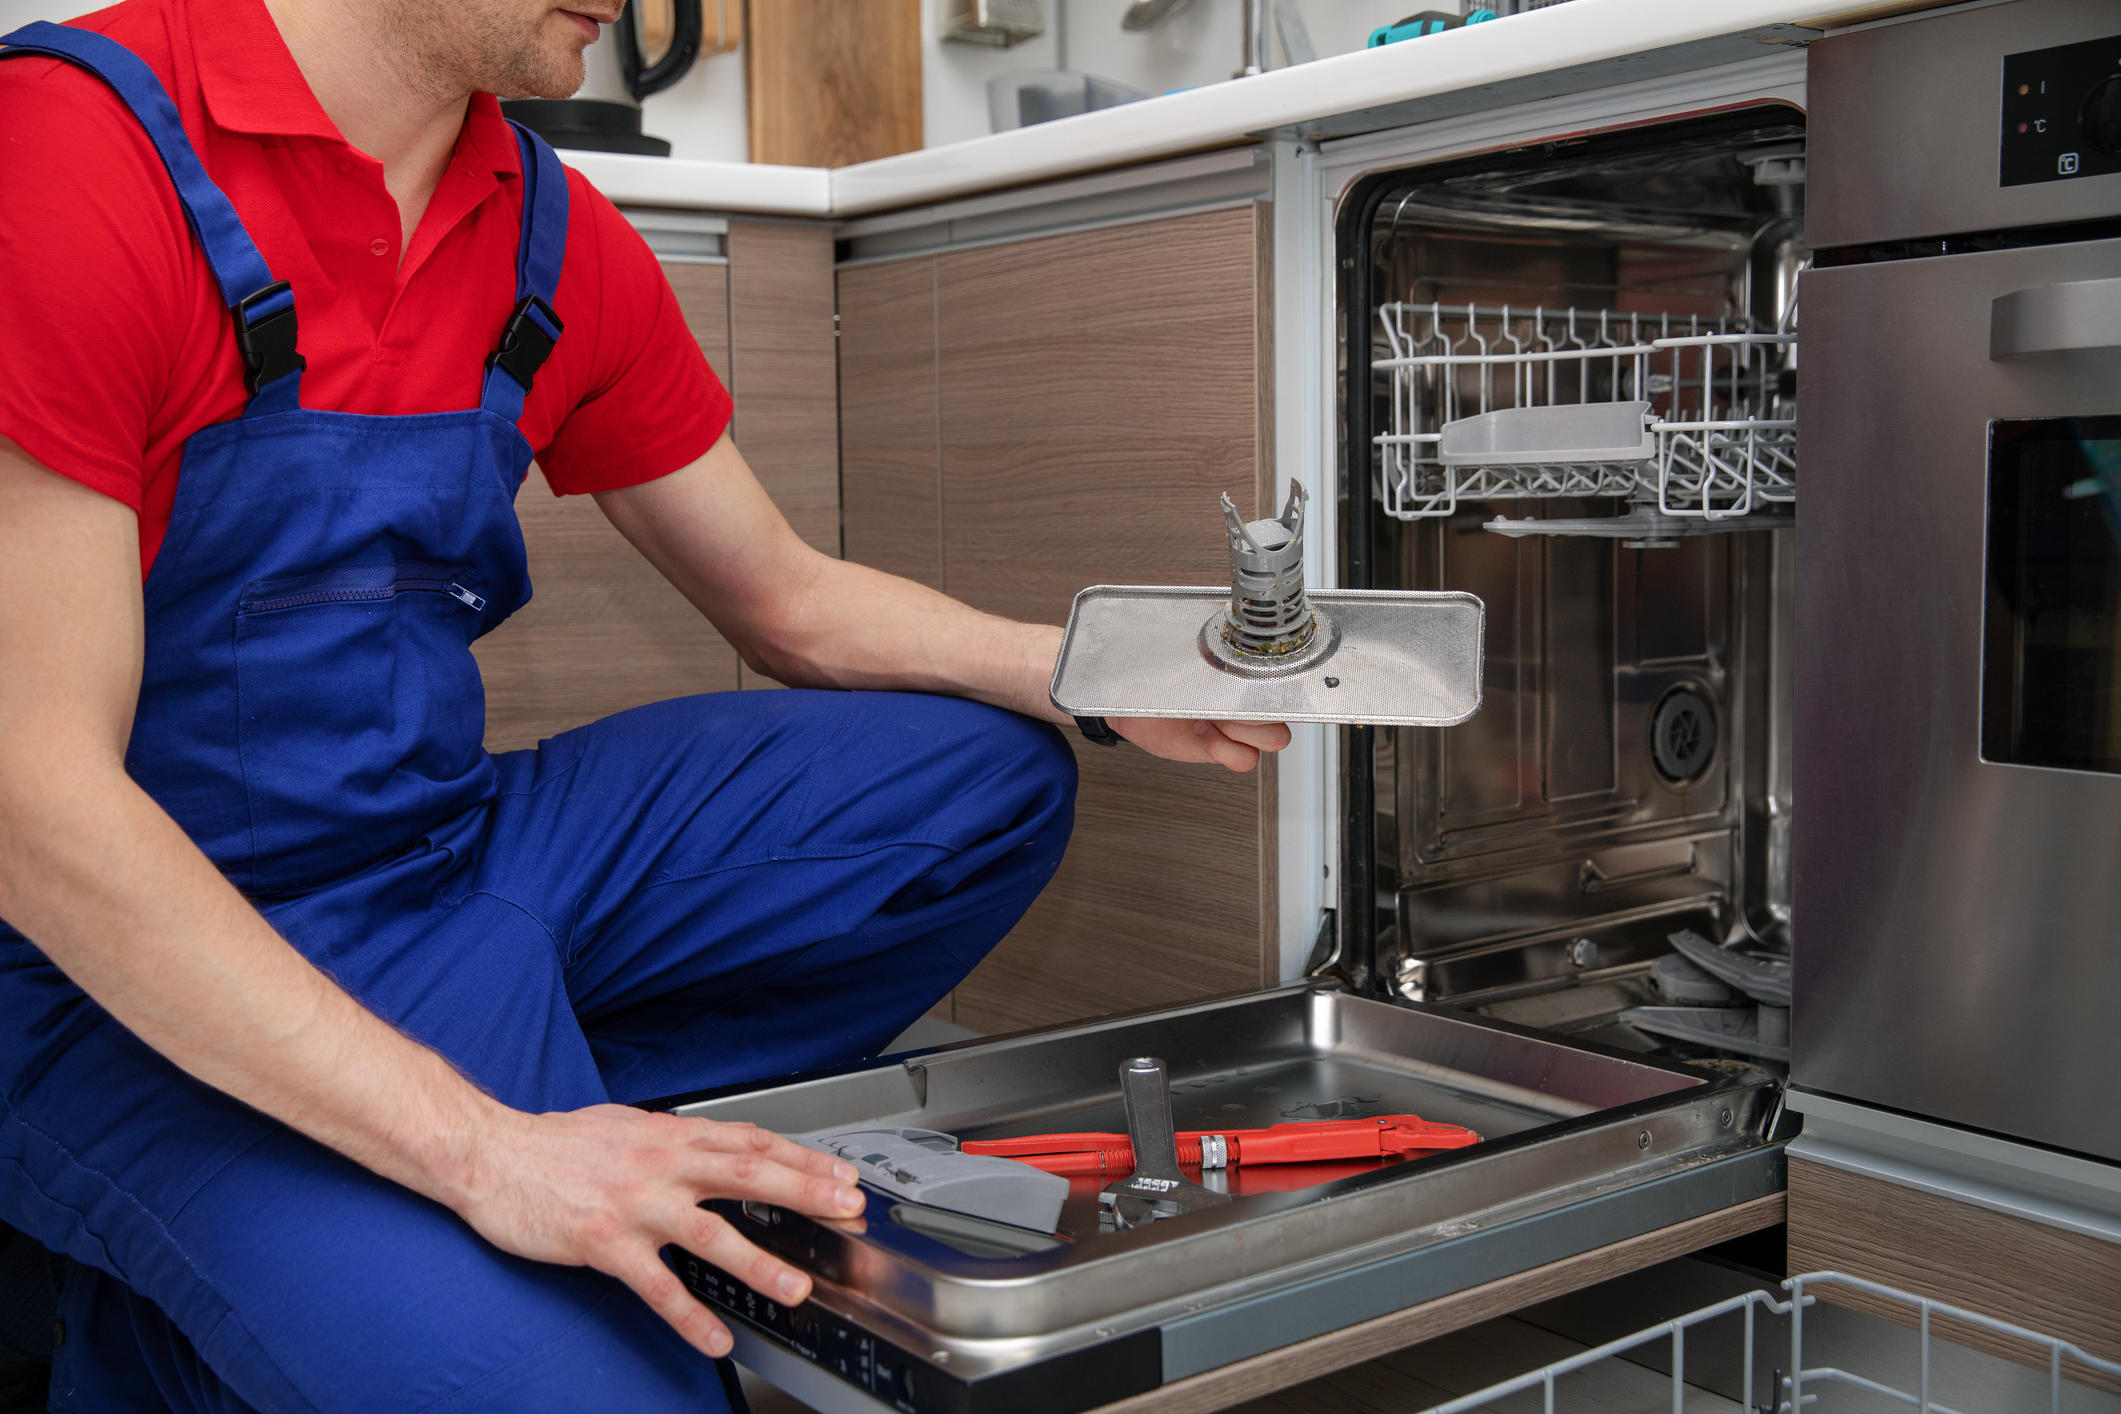 Count on Elite Appliance Repair LLC for expert dishwasher repair services. We prioritize efficiency and quality, ensuring swift and professional repairs that restore your dishwasher's functionality